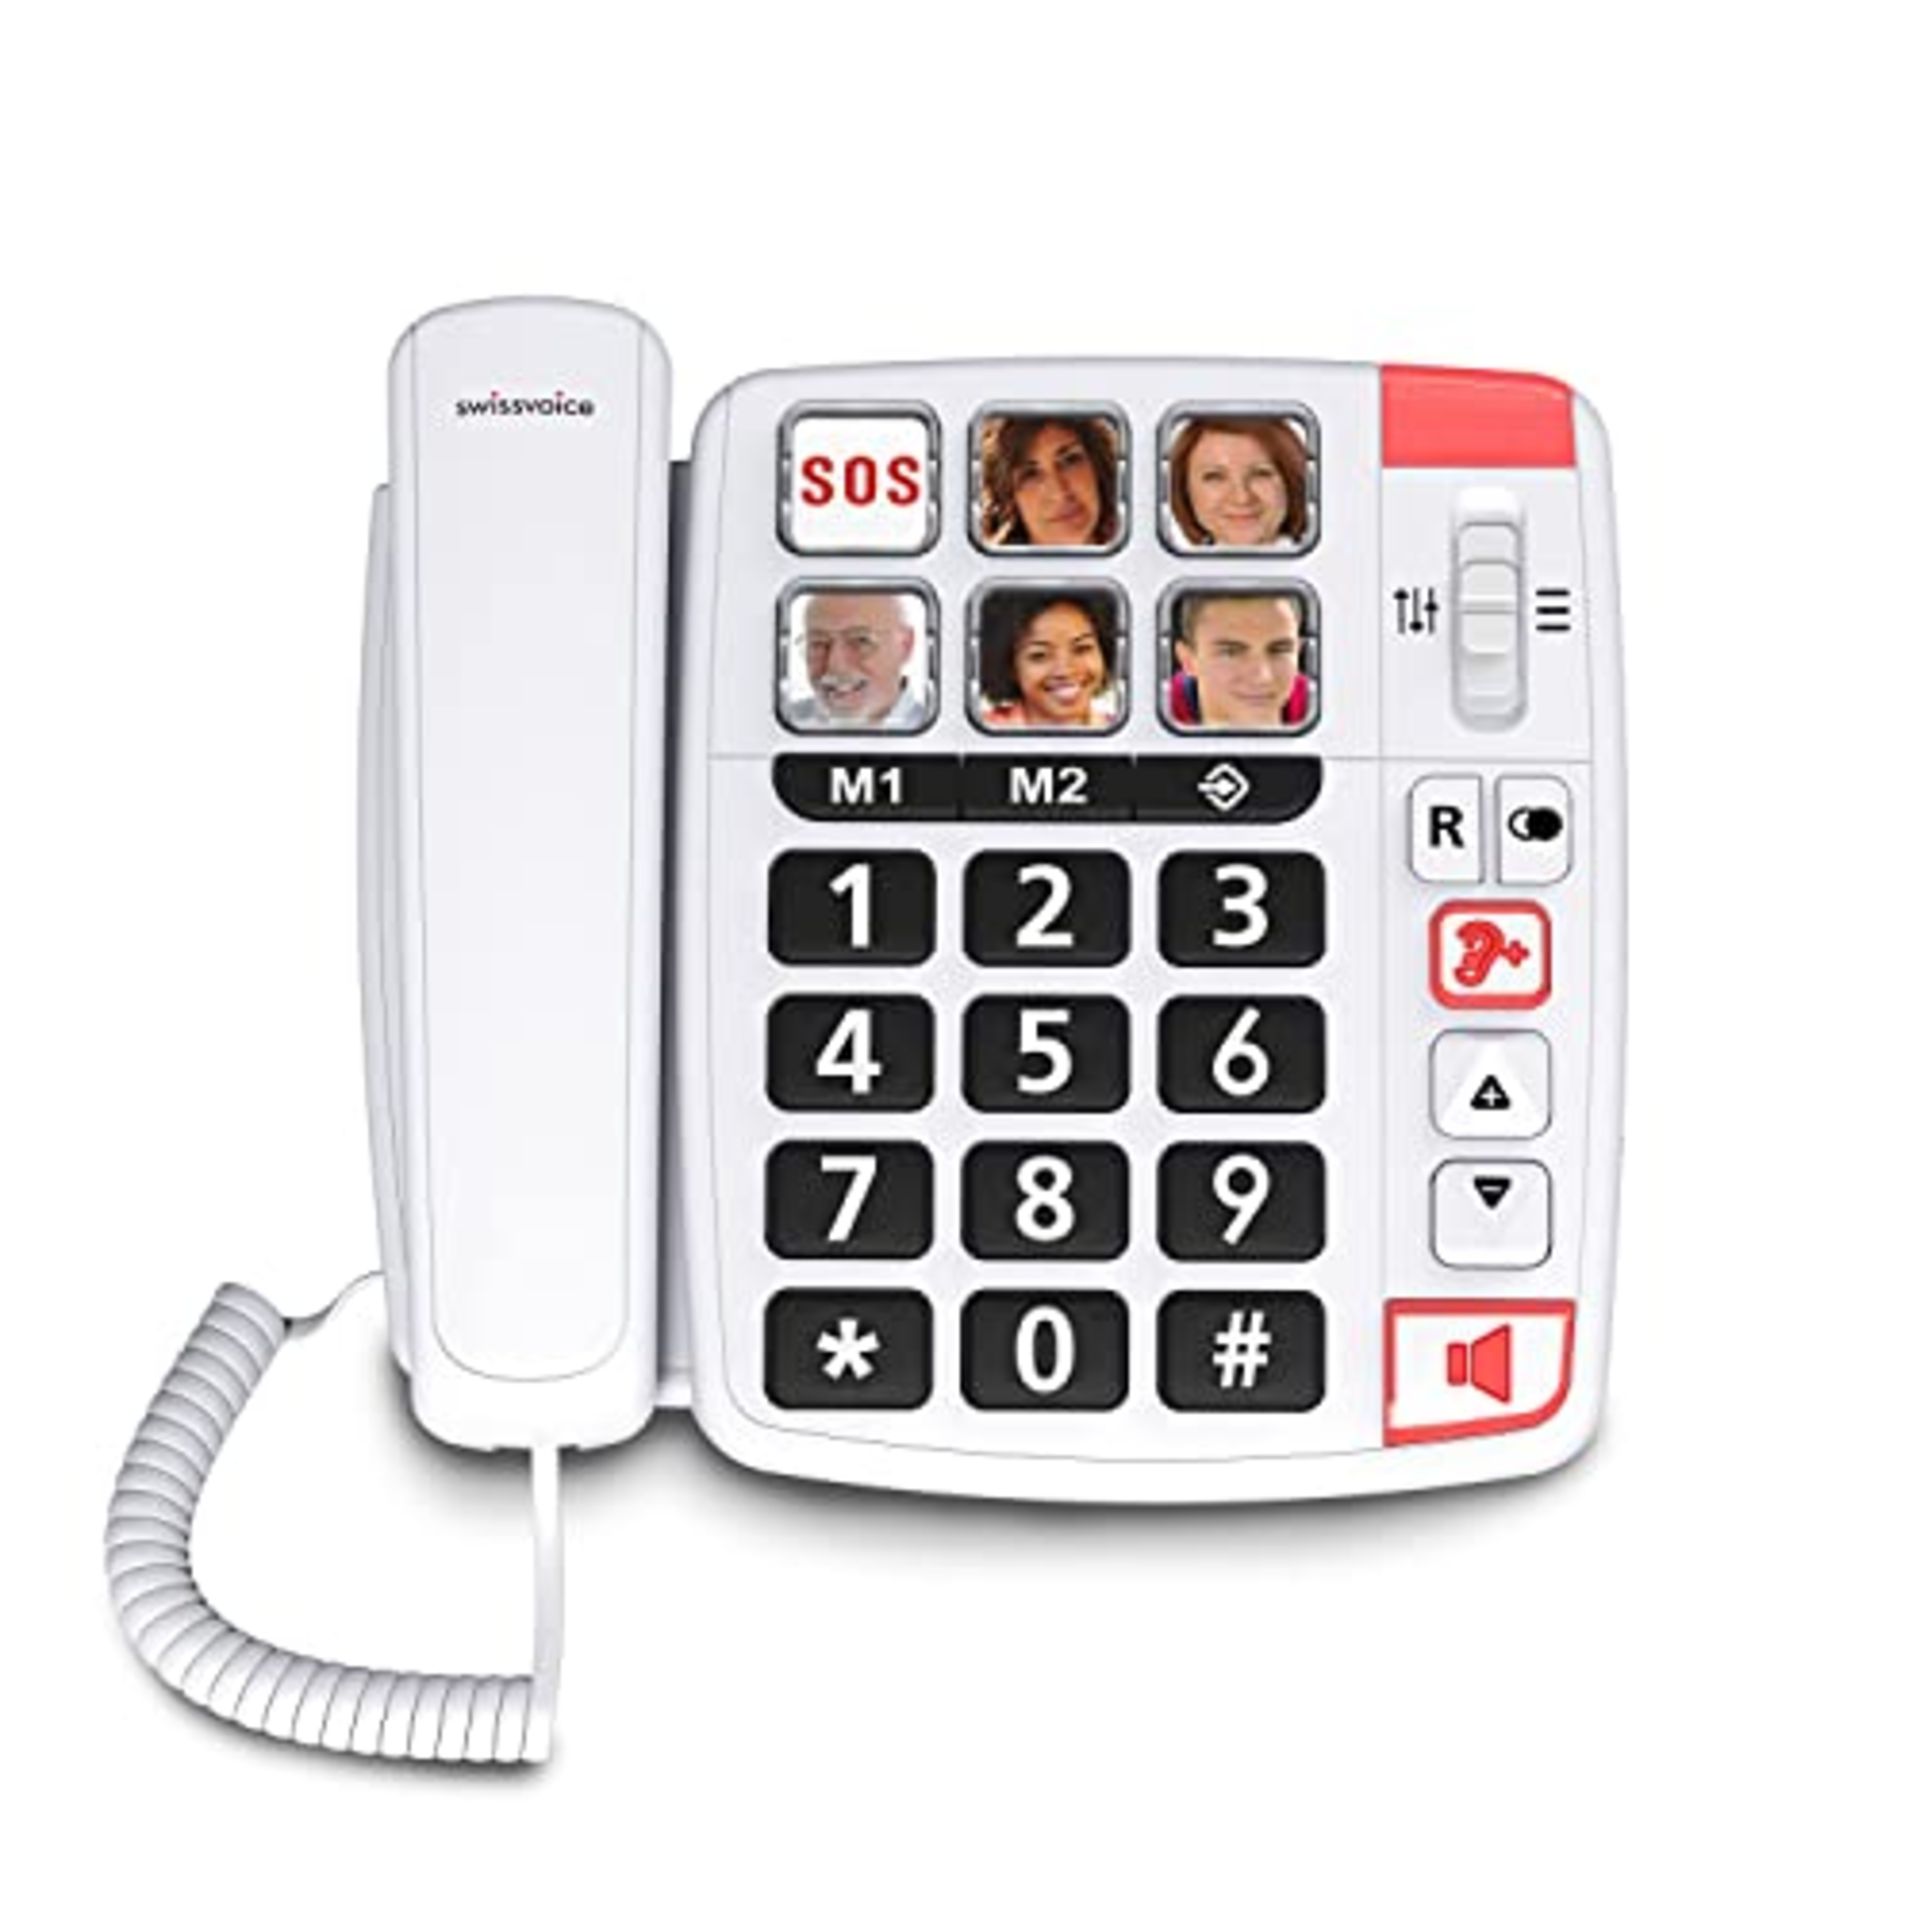 SWISSVOICE Xtra 1110 - Big Button Phone for Elderly - Phones for Hard of Hearing - Dem